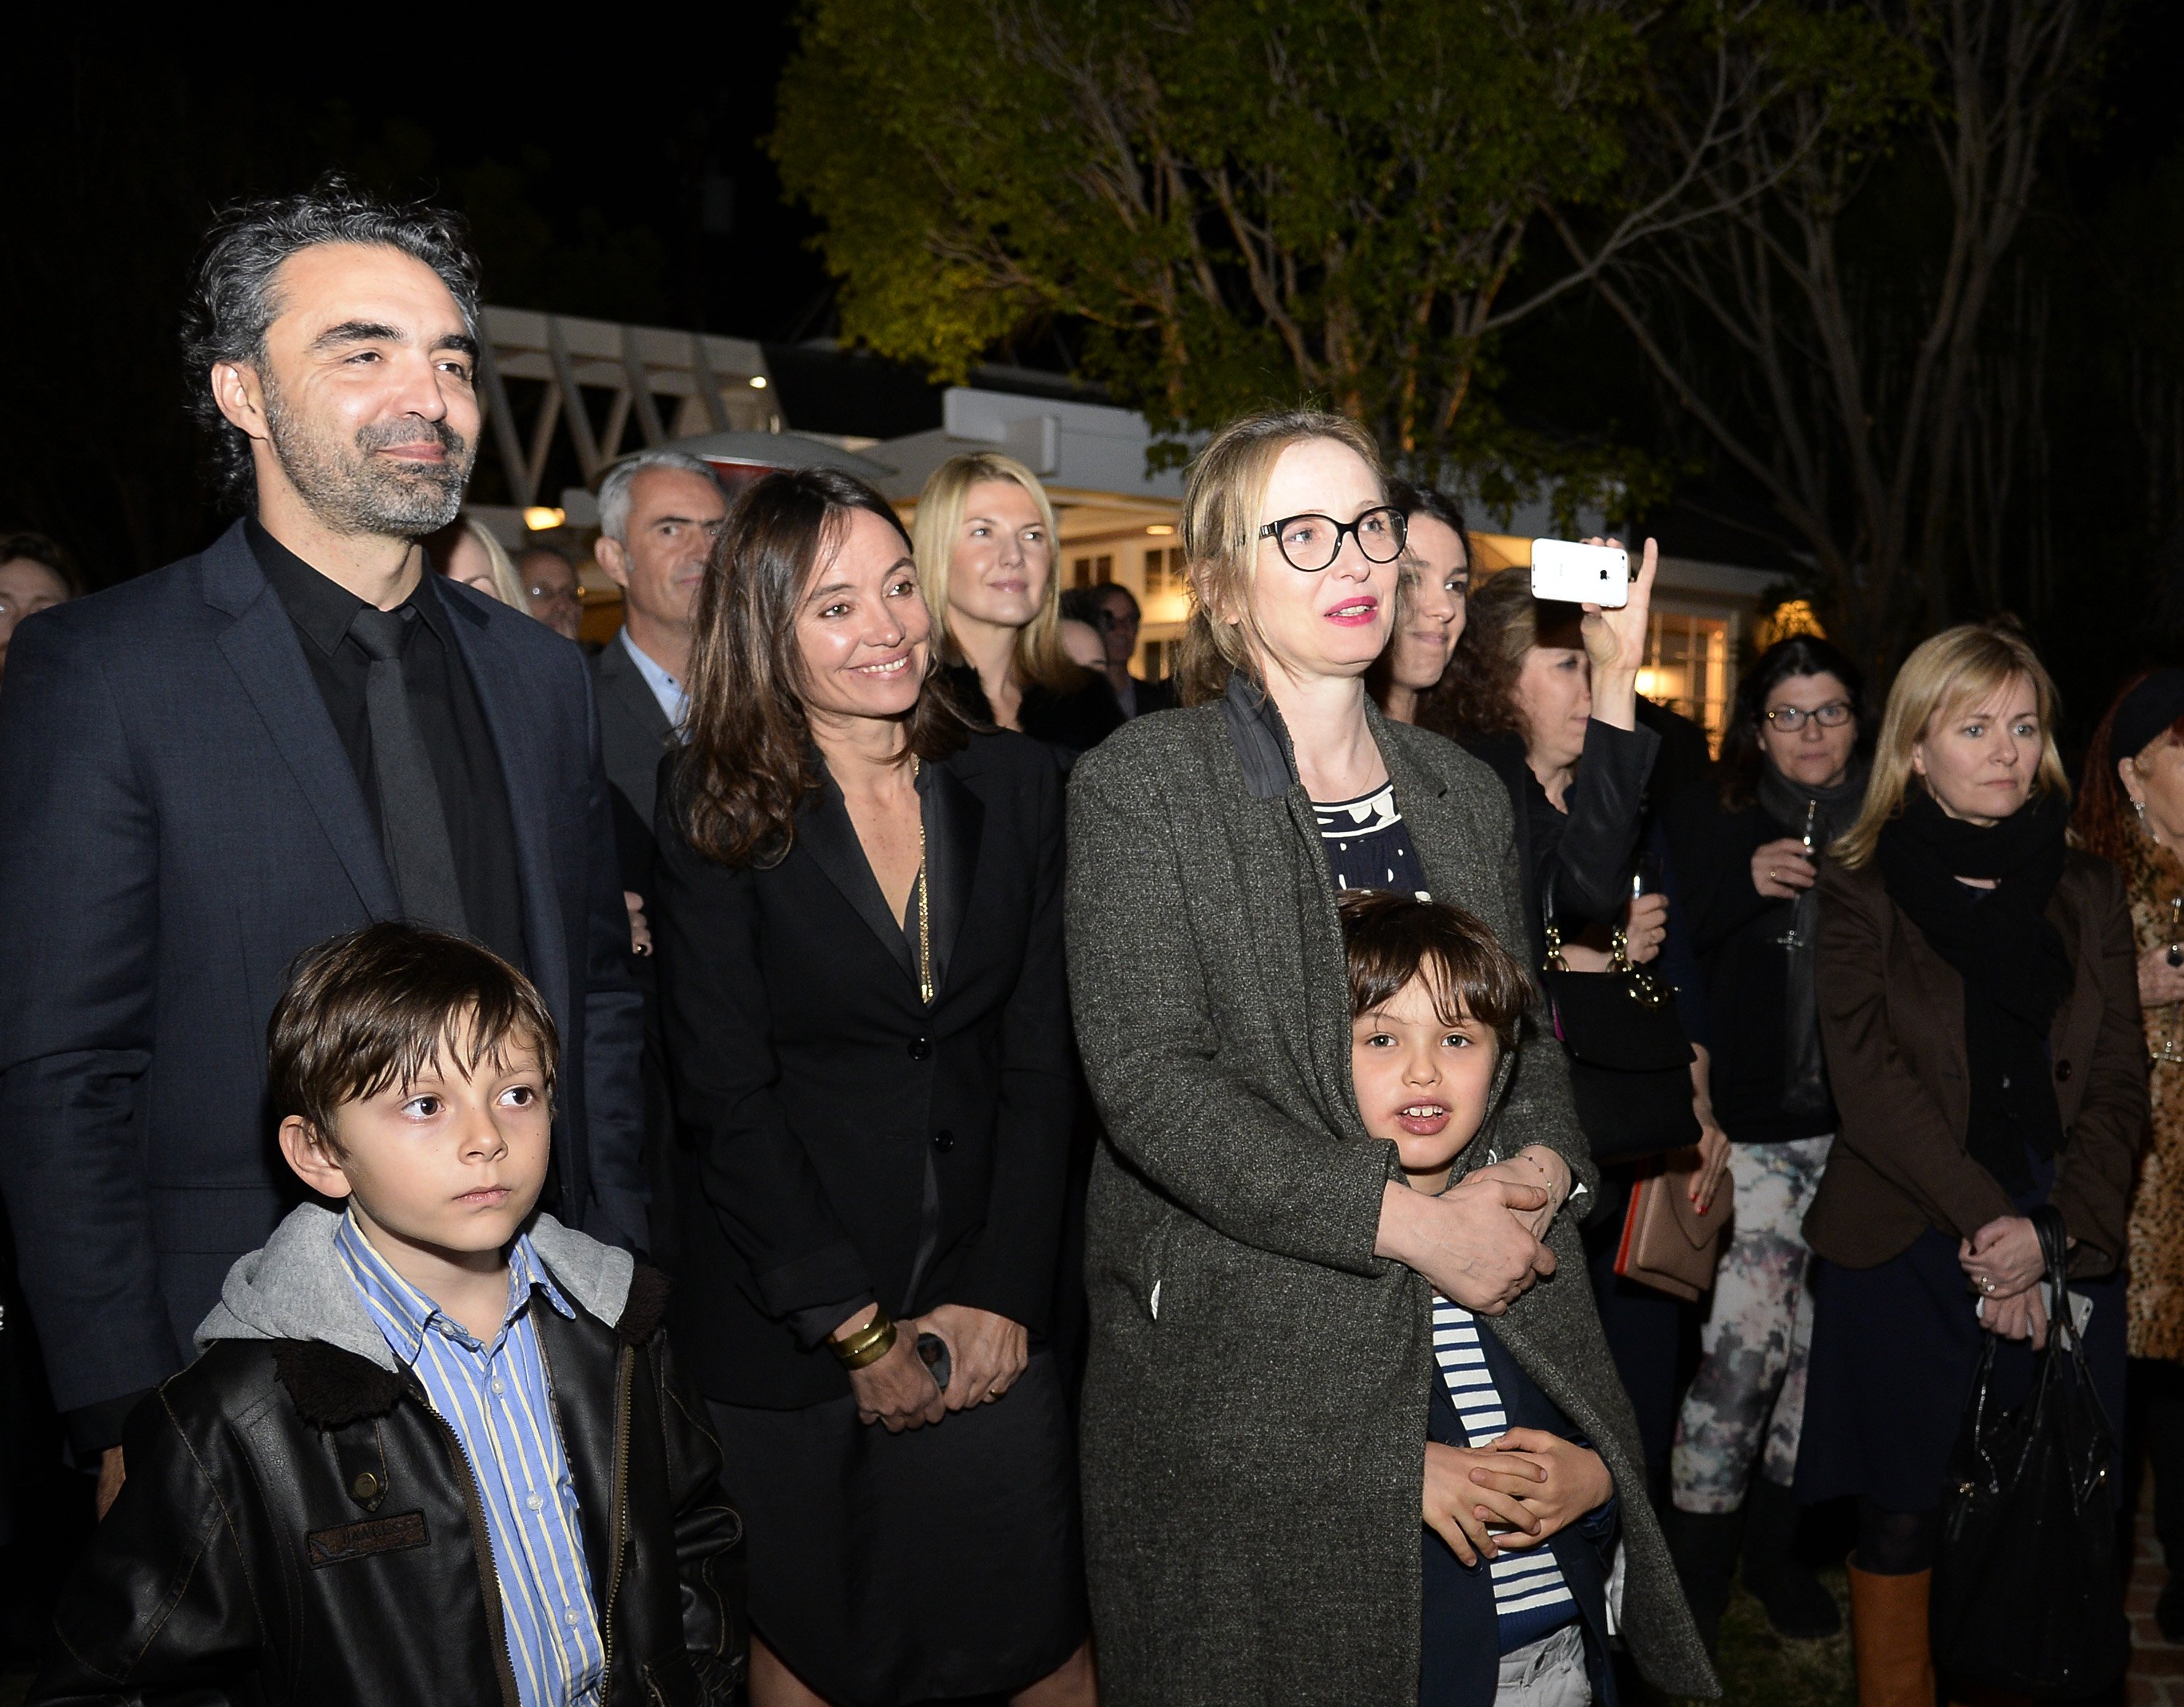  Actress Julie Deply (C) with her son Leo Streitenfeld and guests during a ceremony where she received the French Order of Arts and Letters from France's Culture Minister Mme Fleur Pellerin at La Residence de France on February 1, 2016, in Beverly Hills, California. | Source: Getty Images